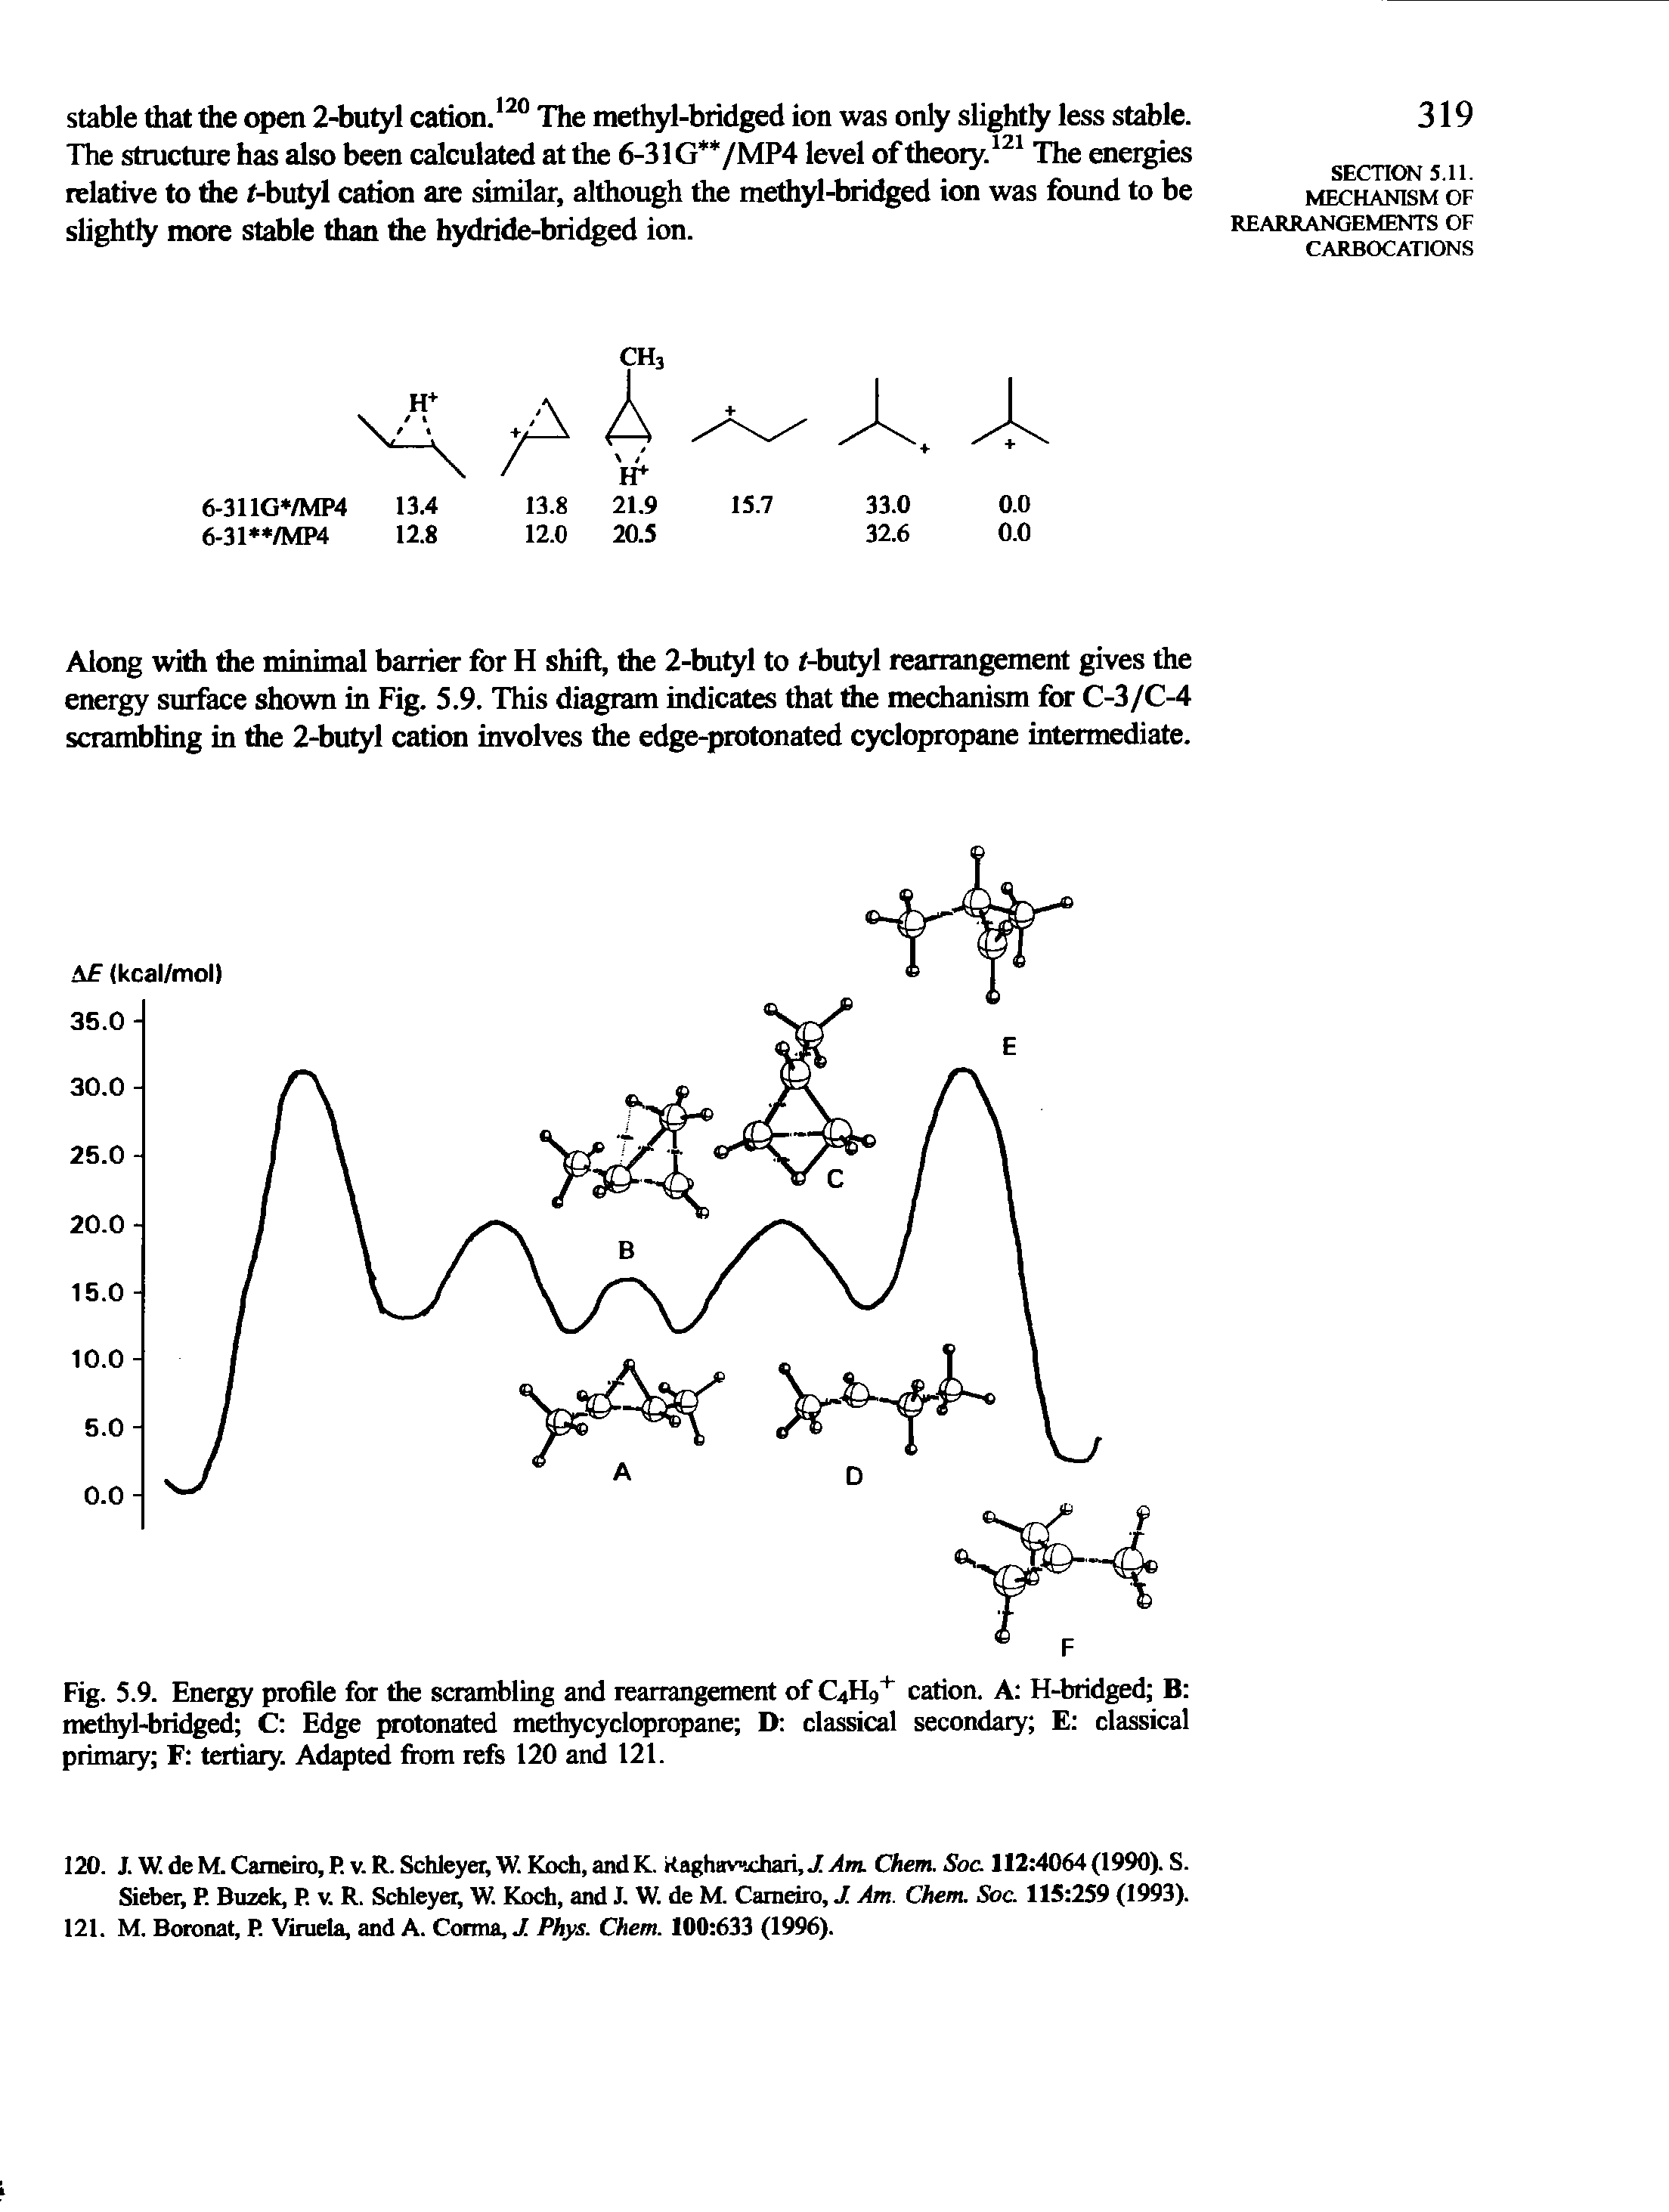 Fig. 5.9. Energy profile for the scrambling and rearrangement of 4119 cation. A H-bridged B methyl-bridged C Edge protonated methycyclopropane D classical secondary E classical primary F tertiary. Adapted from refs 120 and 121.